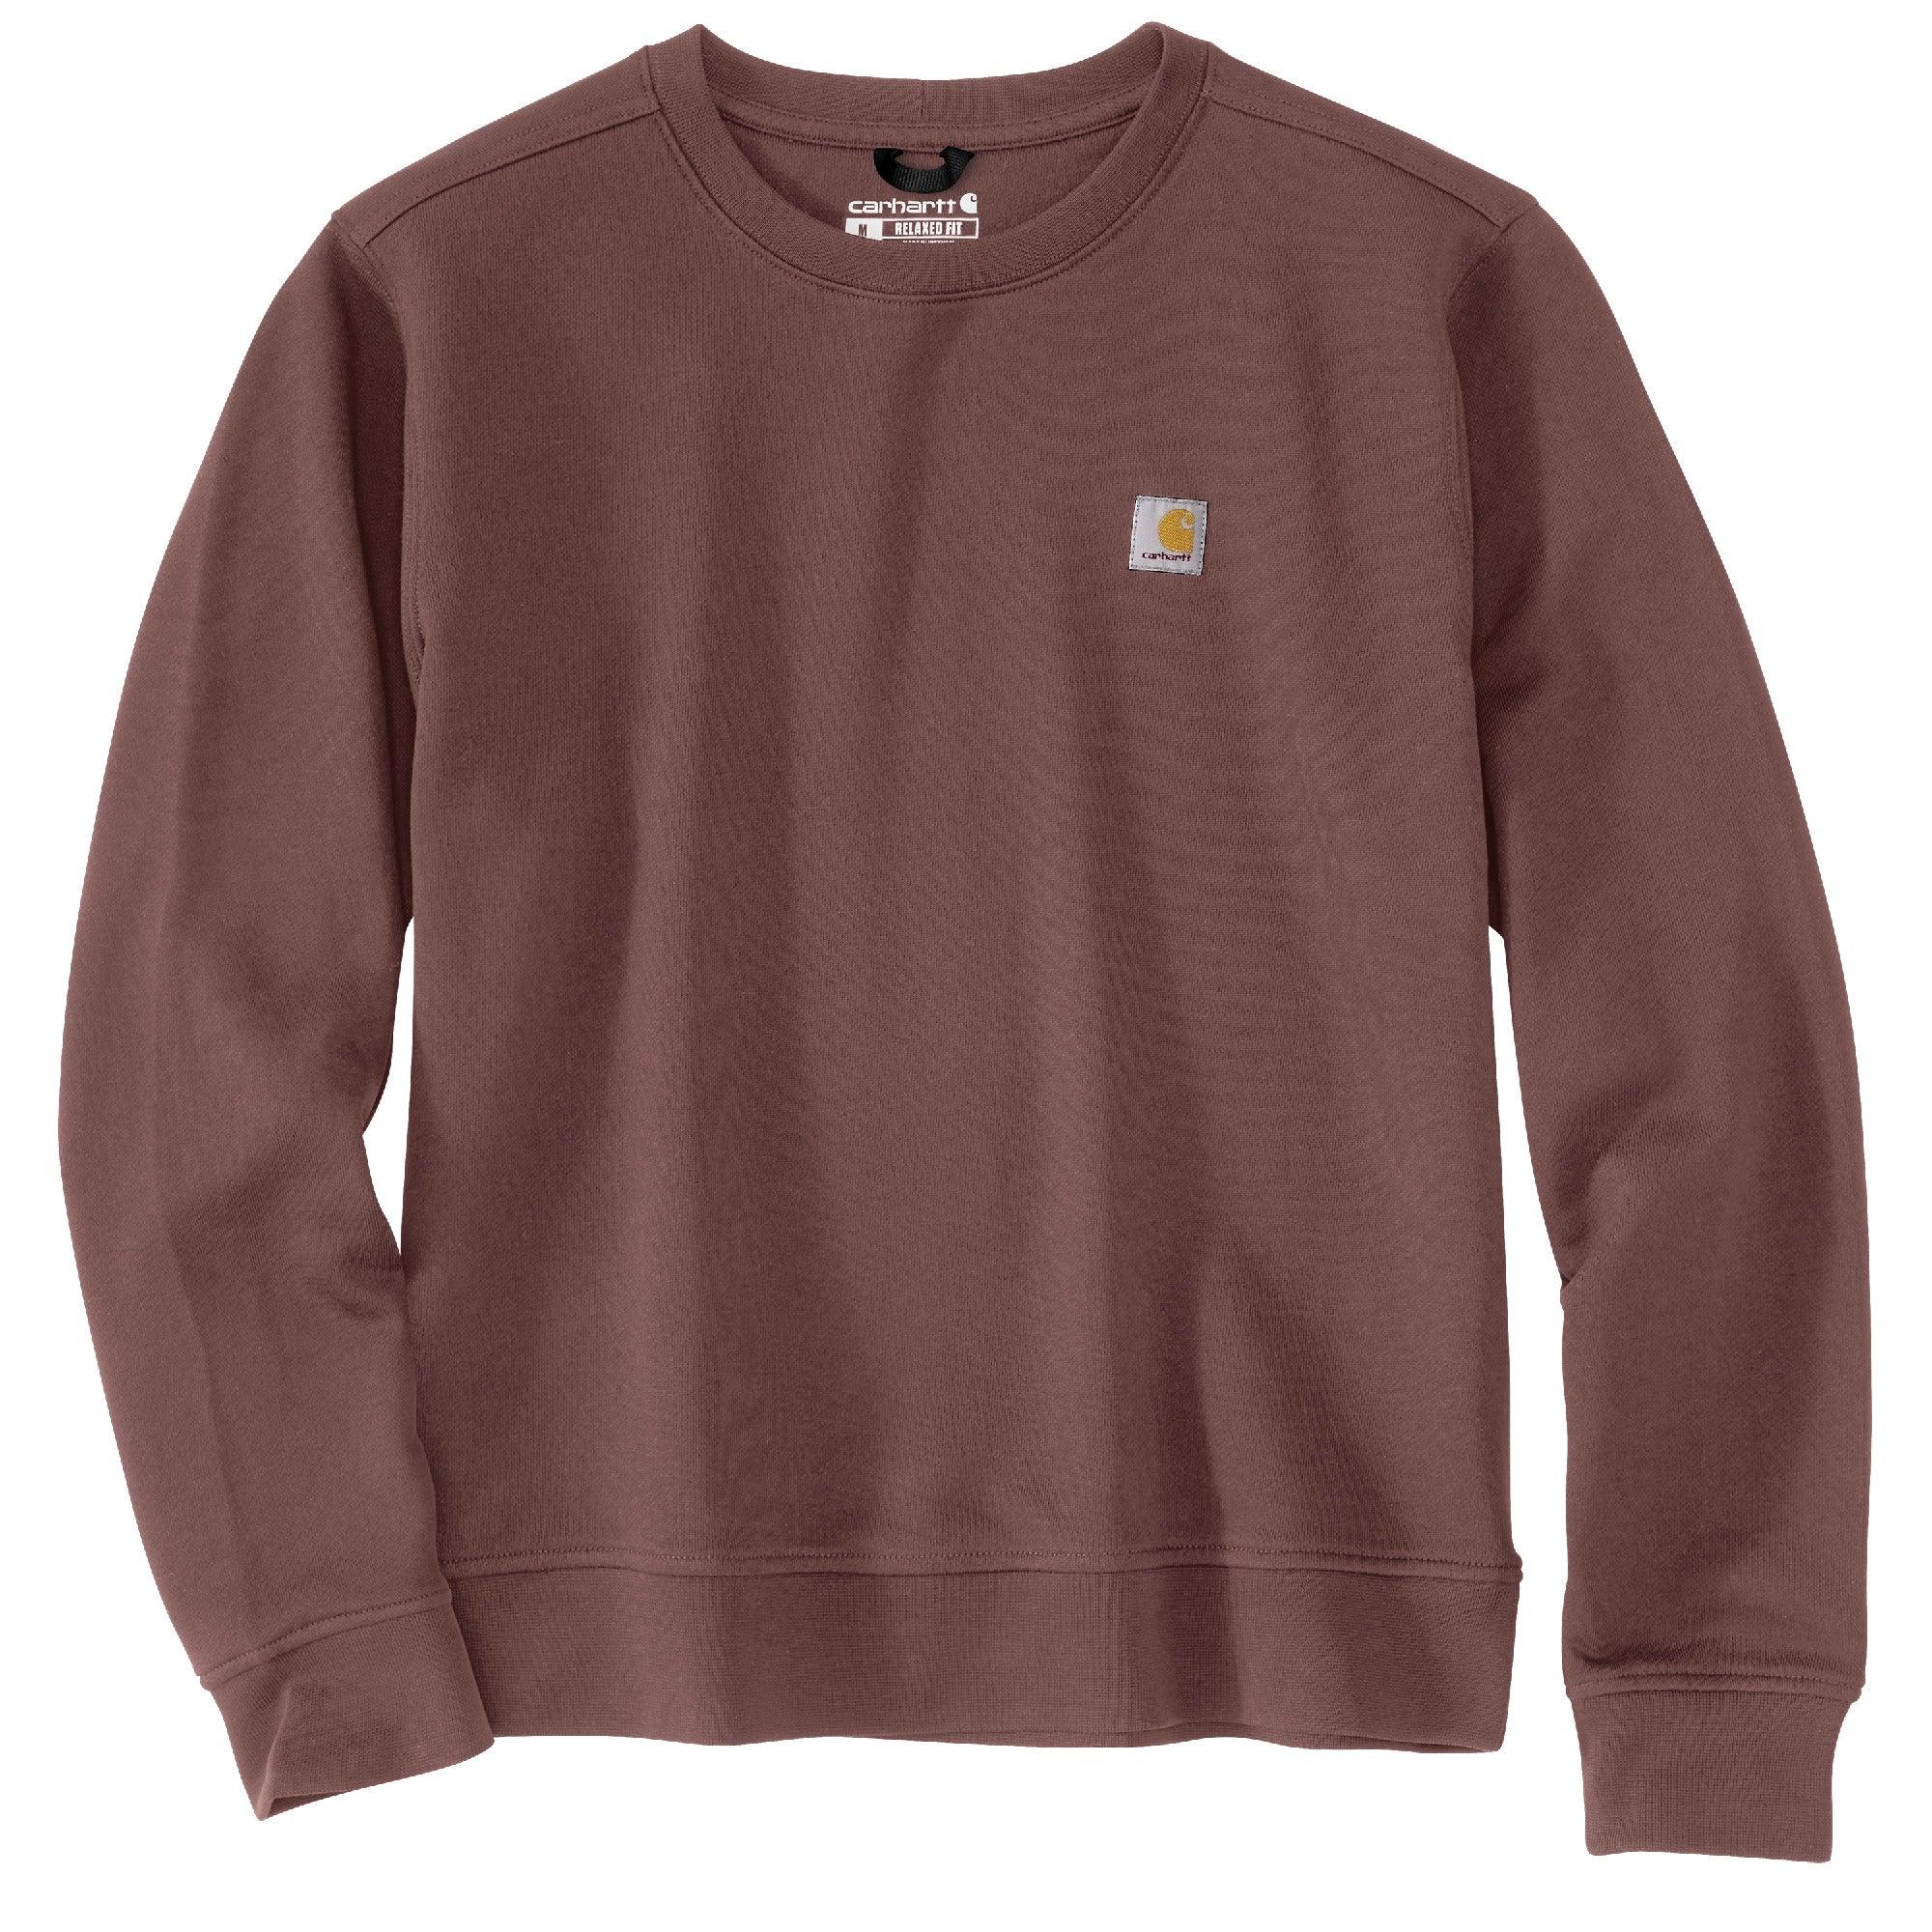 Spring 2024 Relaxed Fit Midweight French Terry Crewneck Sweatshirt - Apple Butter - Purpose-Built / Home of the Trades